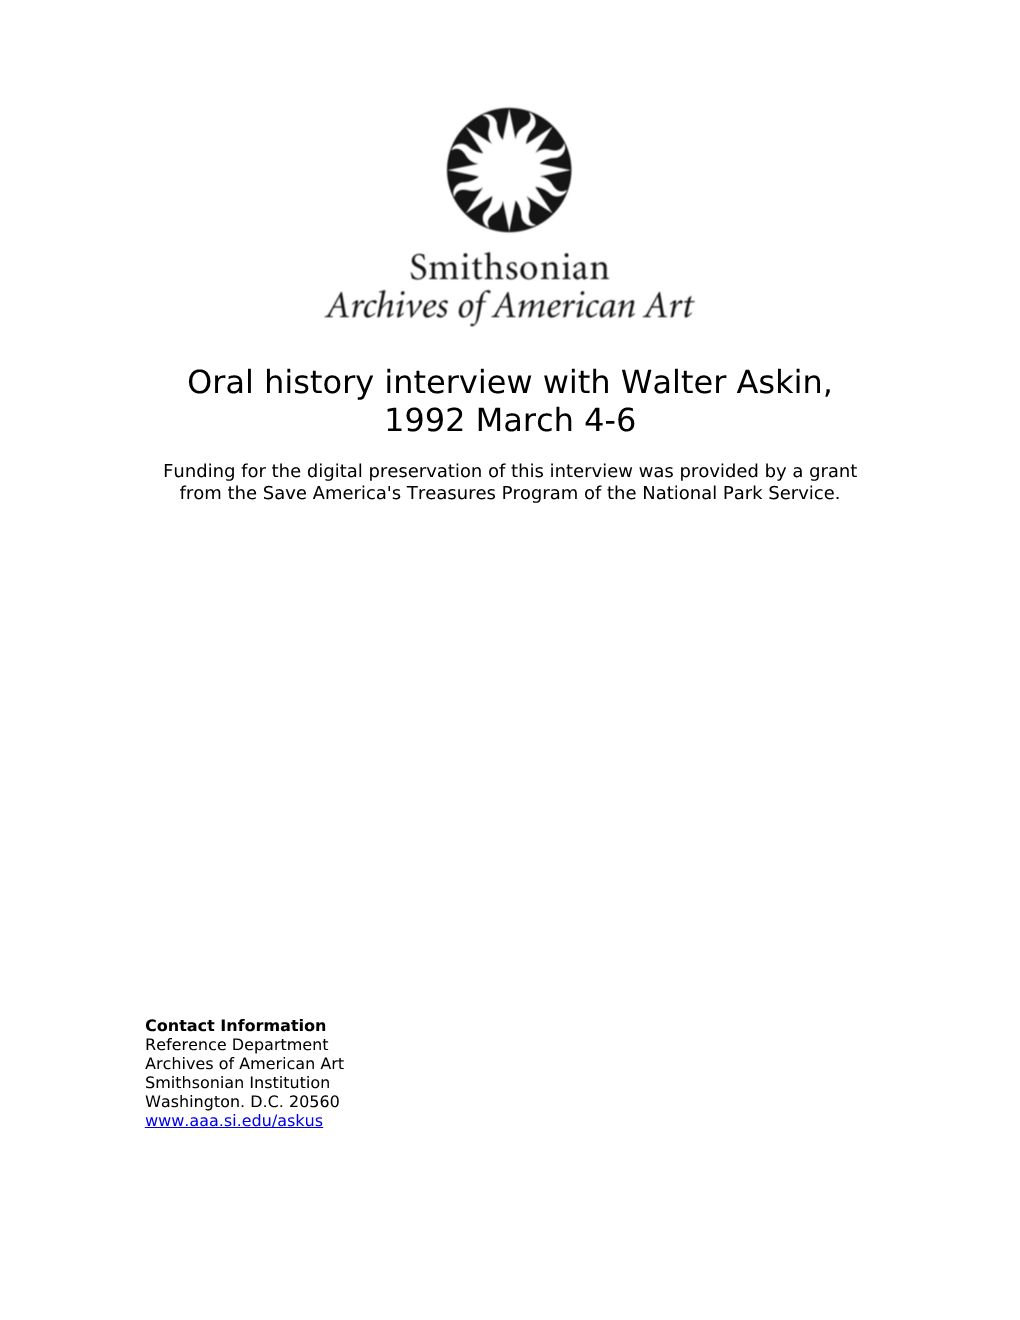 Oral History Interview with Walter Askin, 1992 March 4-6